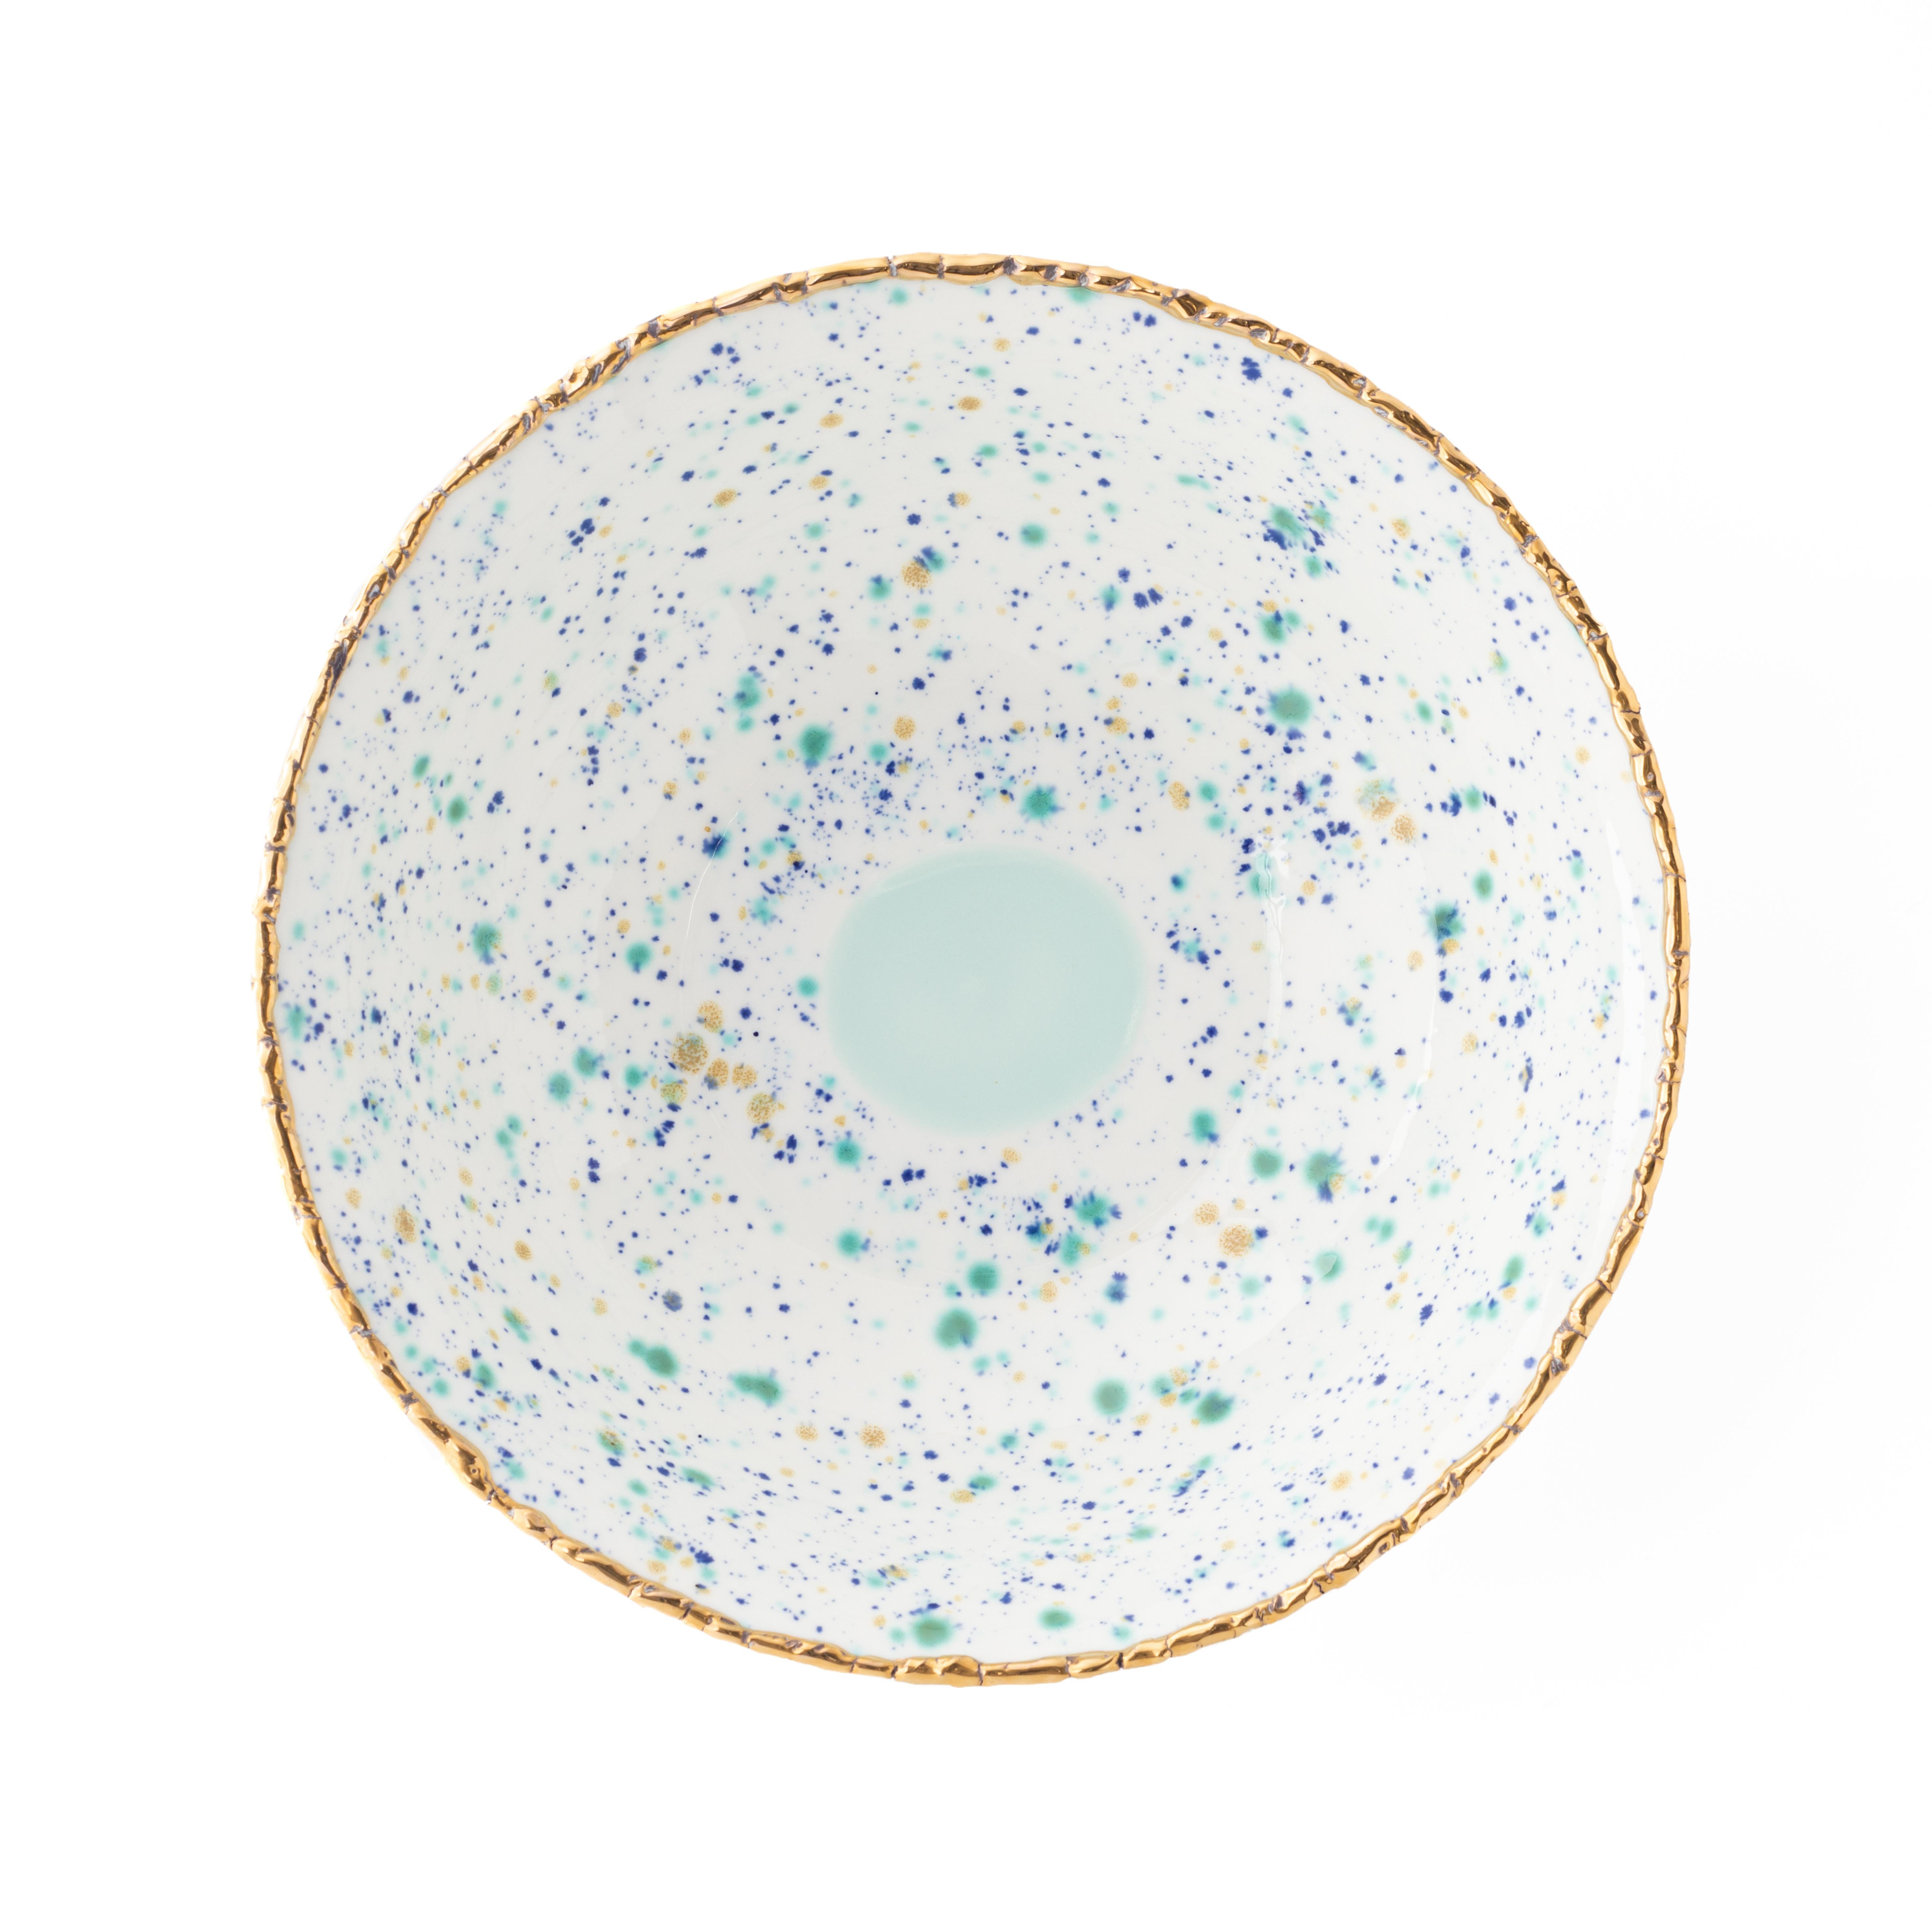 Handcrafted in Italy from the finest porcelain, this blue marble Craquelé Edge salad bowl has an original golden crackled rim emphasizing the blue yellow and green decor outside and inside and the emerald enamel at the center.

Salad bowl, size: Ø